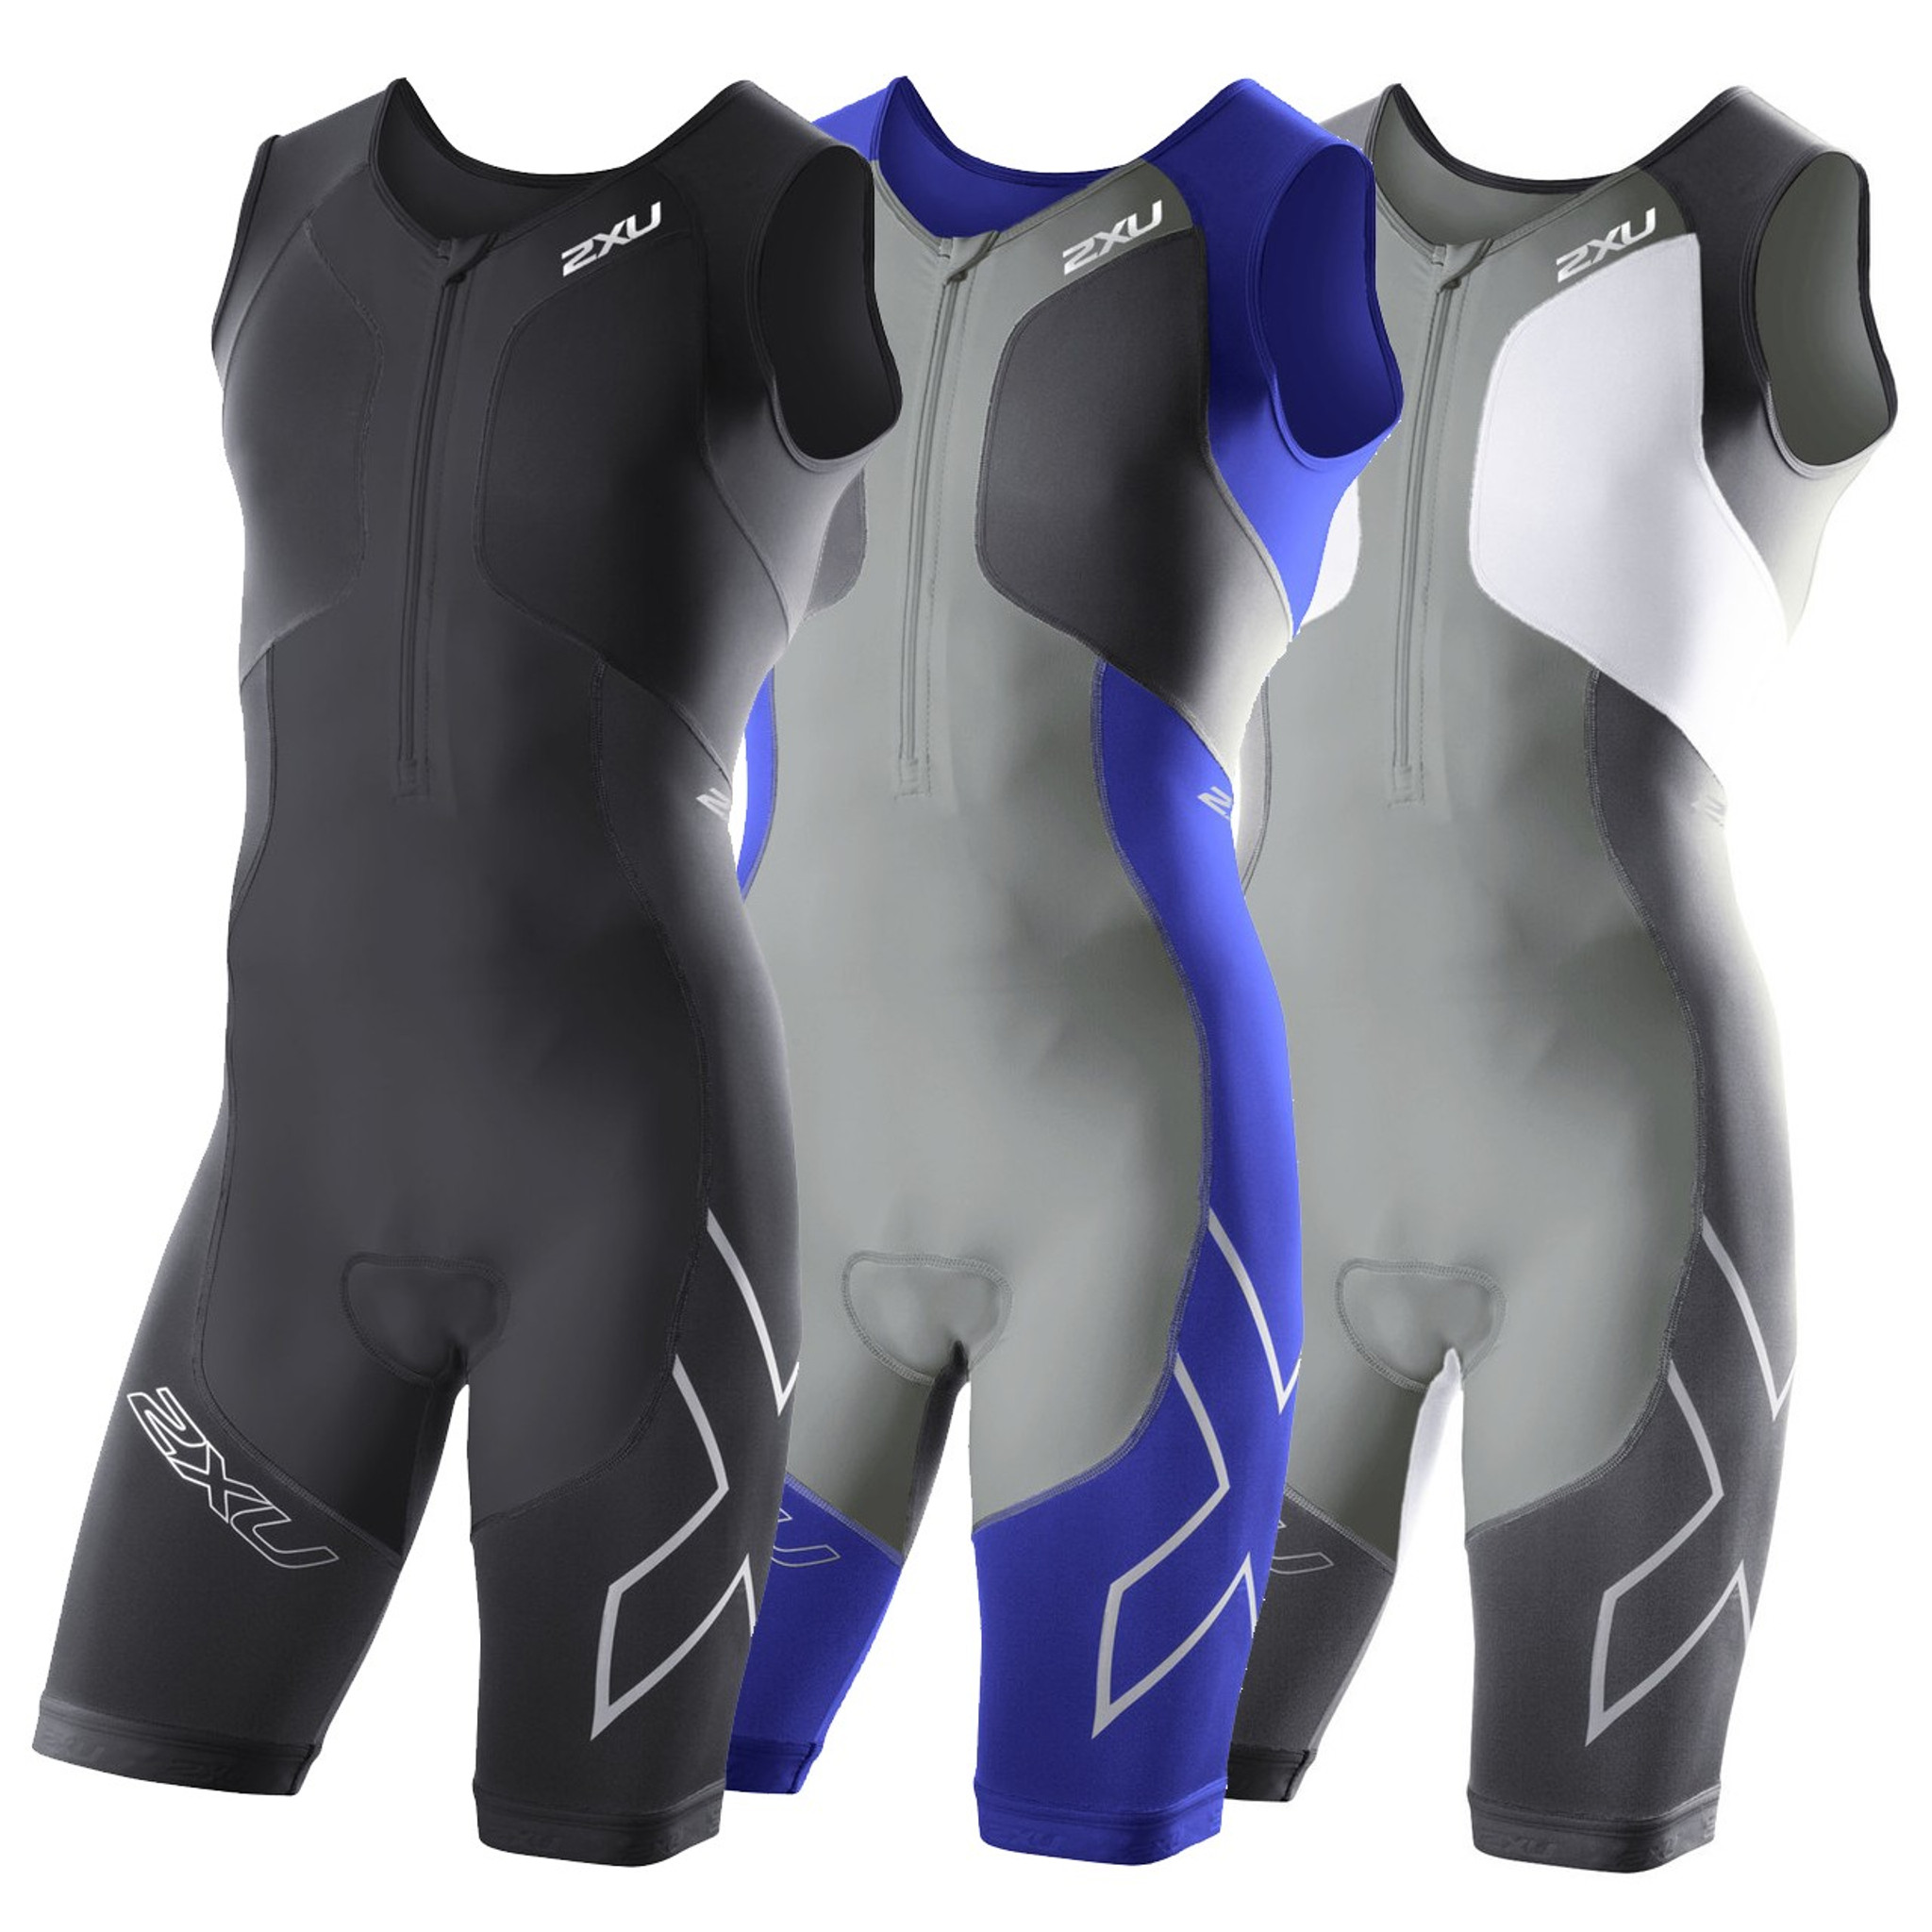 2XU 2014 Men's G:2 Compression - Black, Charcoal/White, Nautic Blue/Charcoal - MyTriathlon 2XU's Second of the Iconic Compression Trisuit